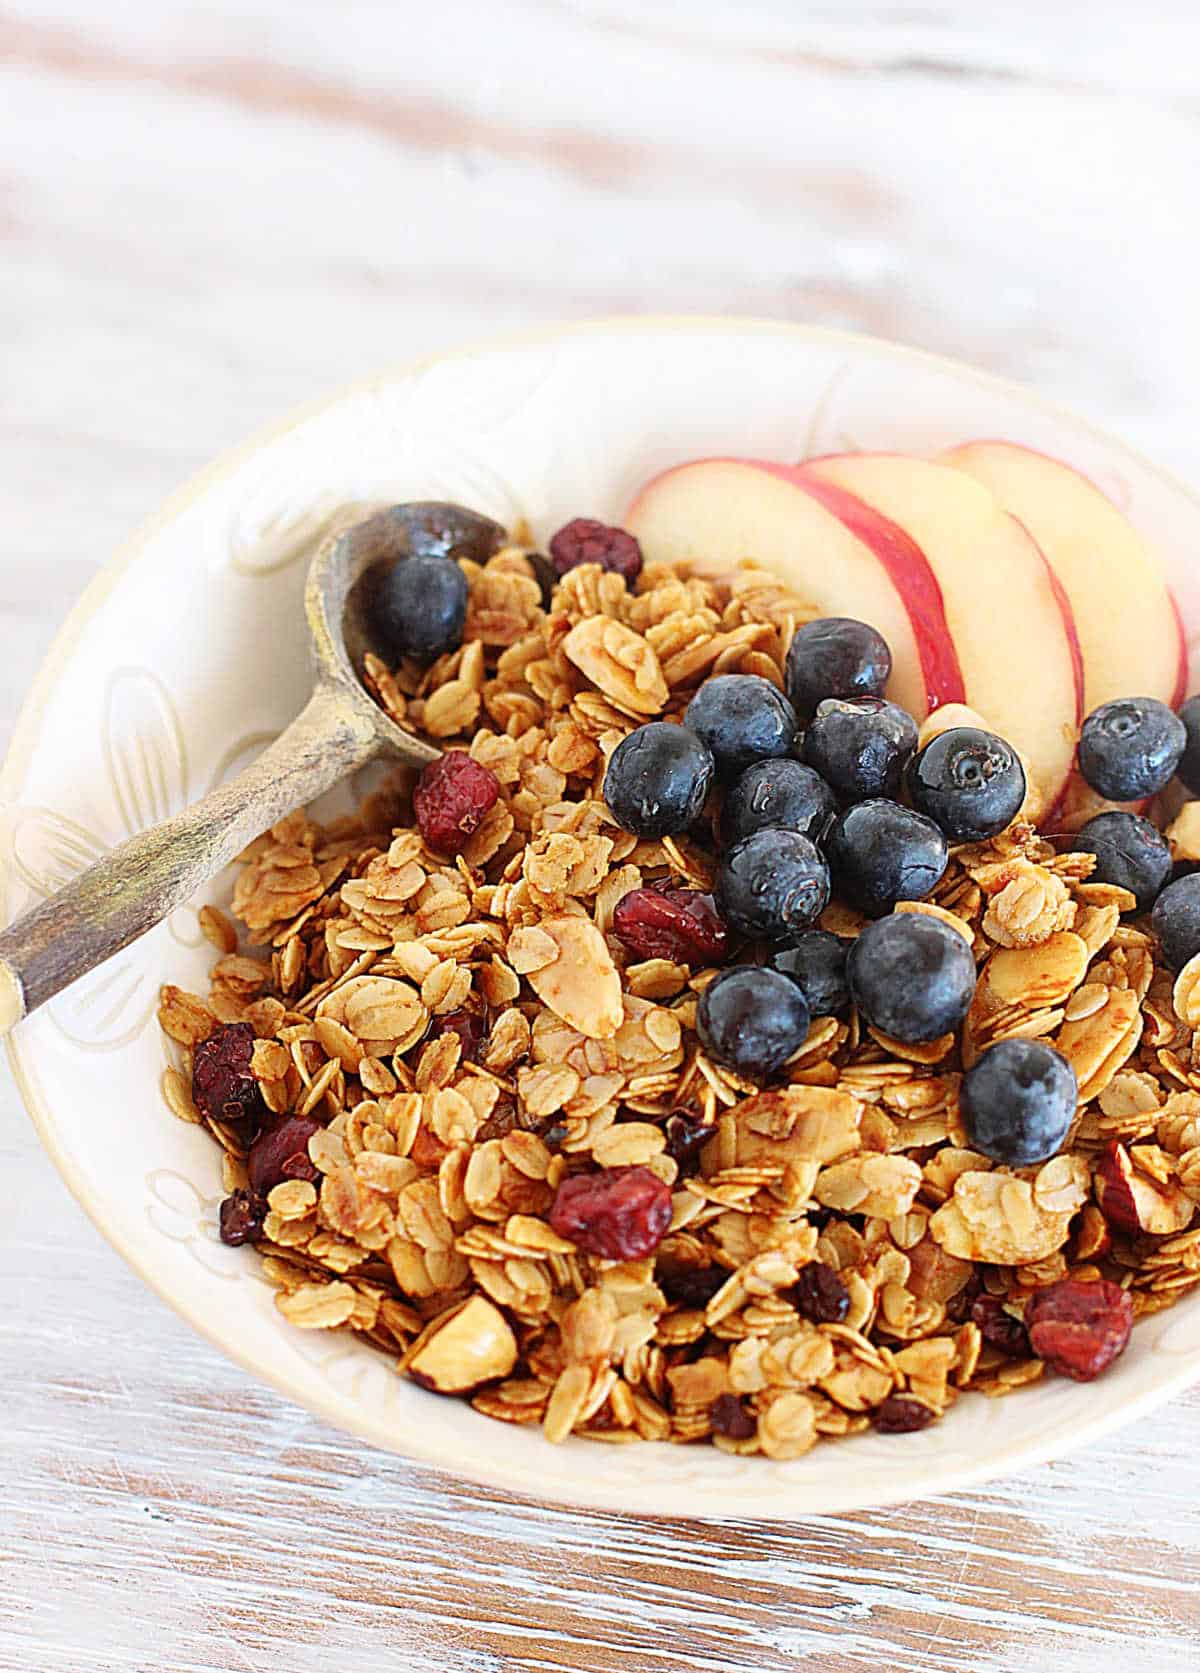 White bowl filled with granola, apples and blueberries, with wooden spoon, on white table